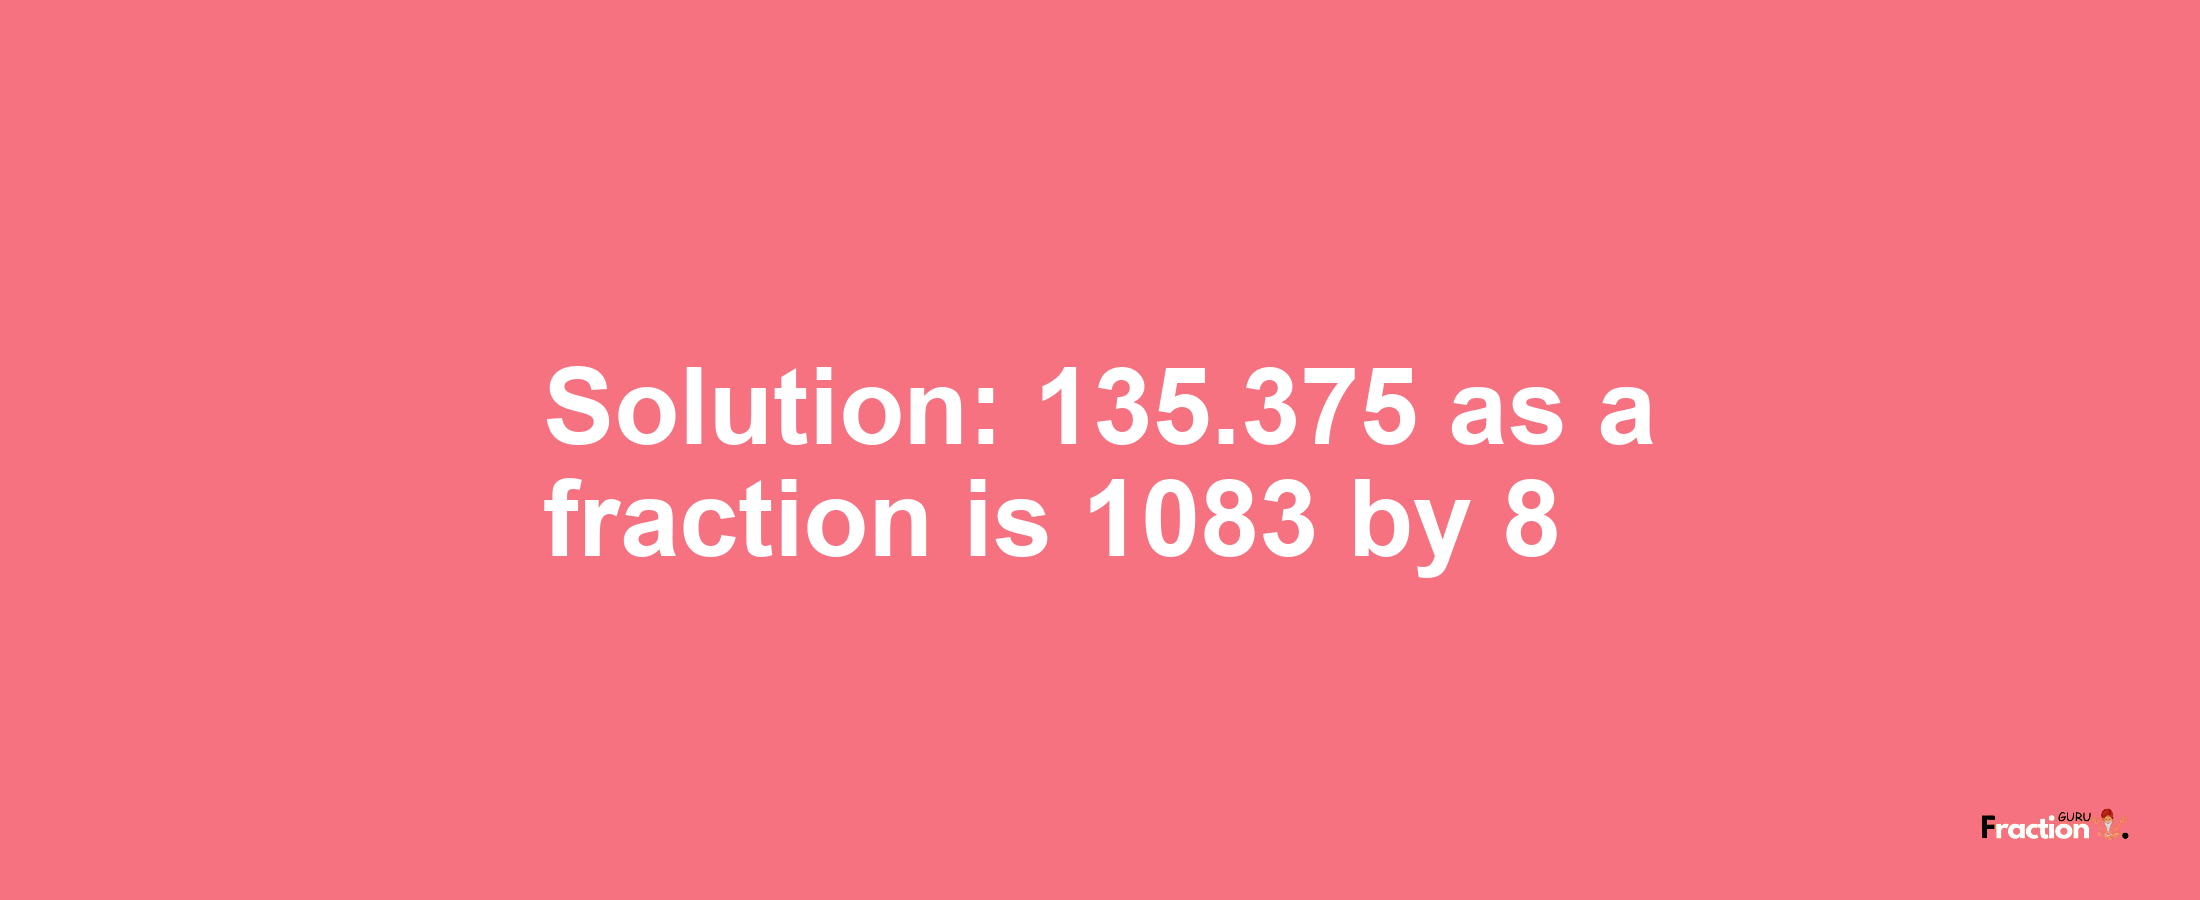 Solution:135.375 as a fraction is 1083/8